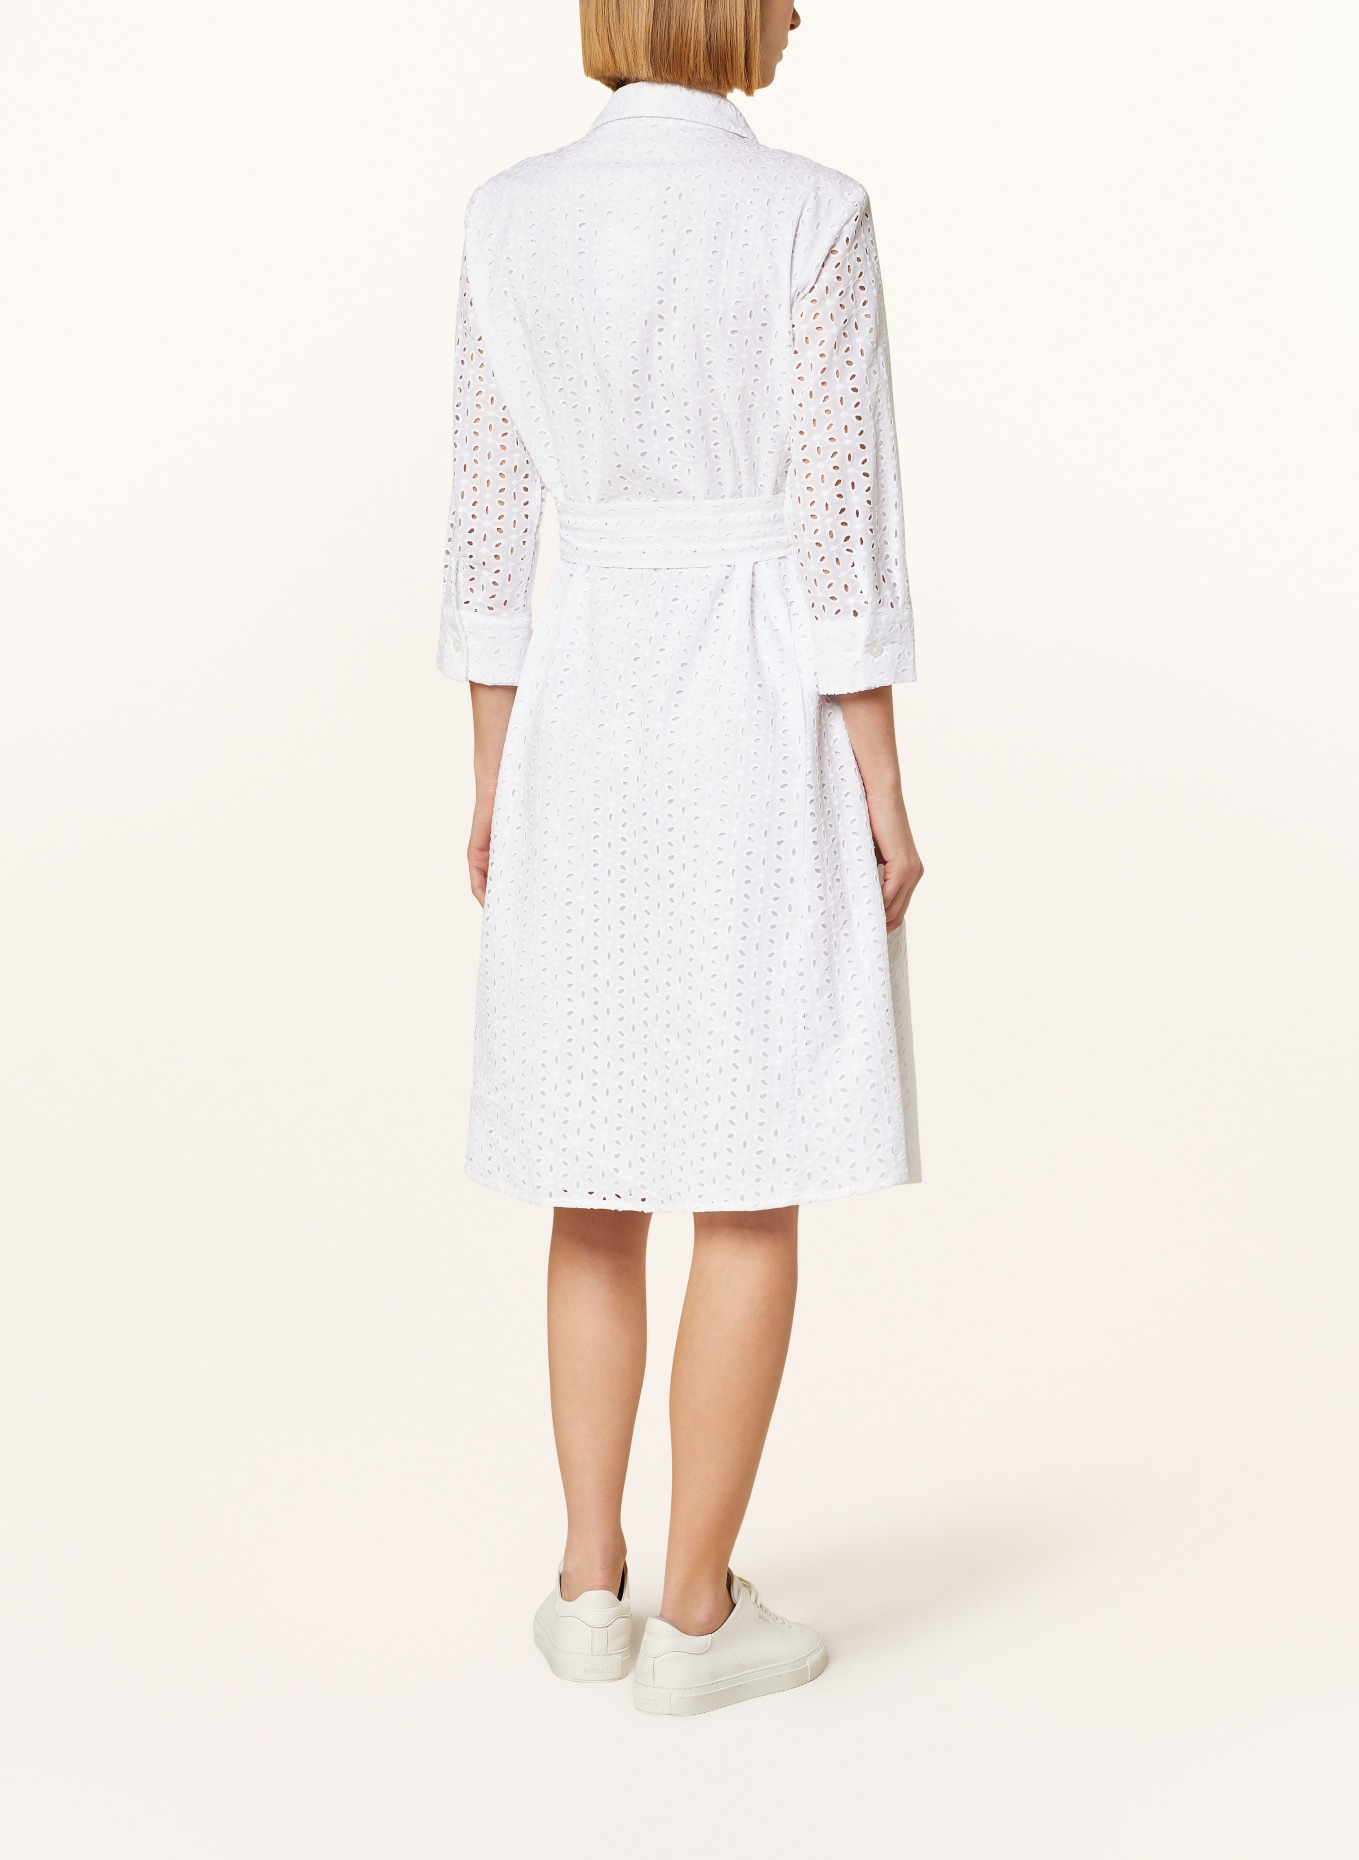 rossana diva Shirt dress in lace, Color: WHITE (Image 3)